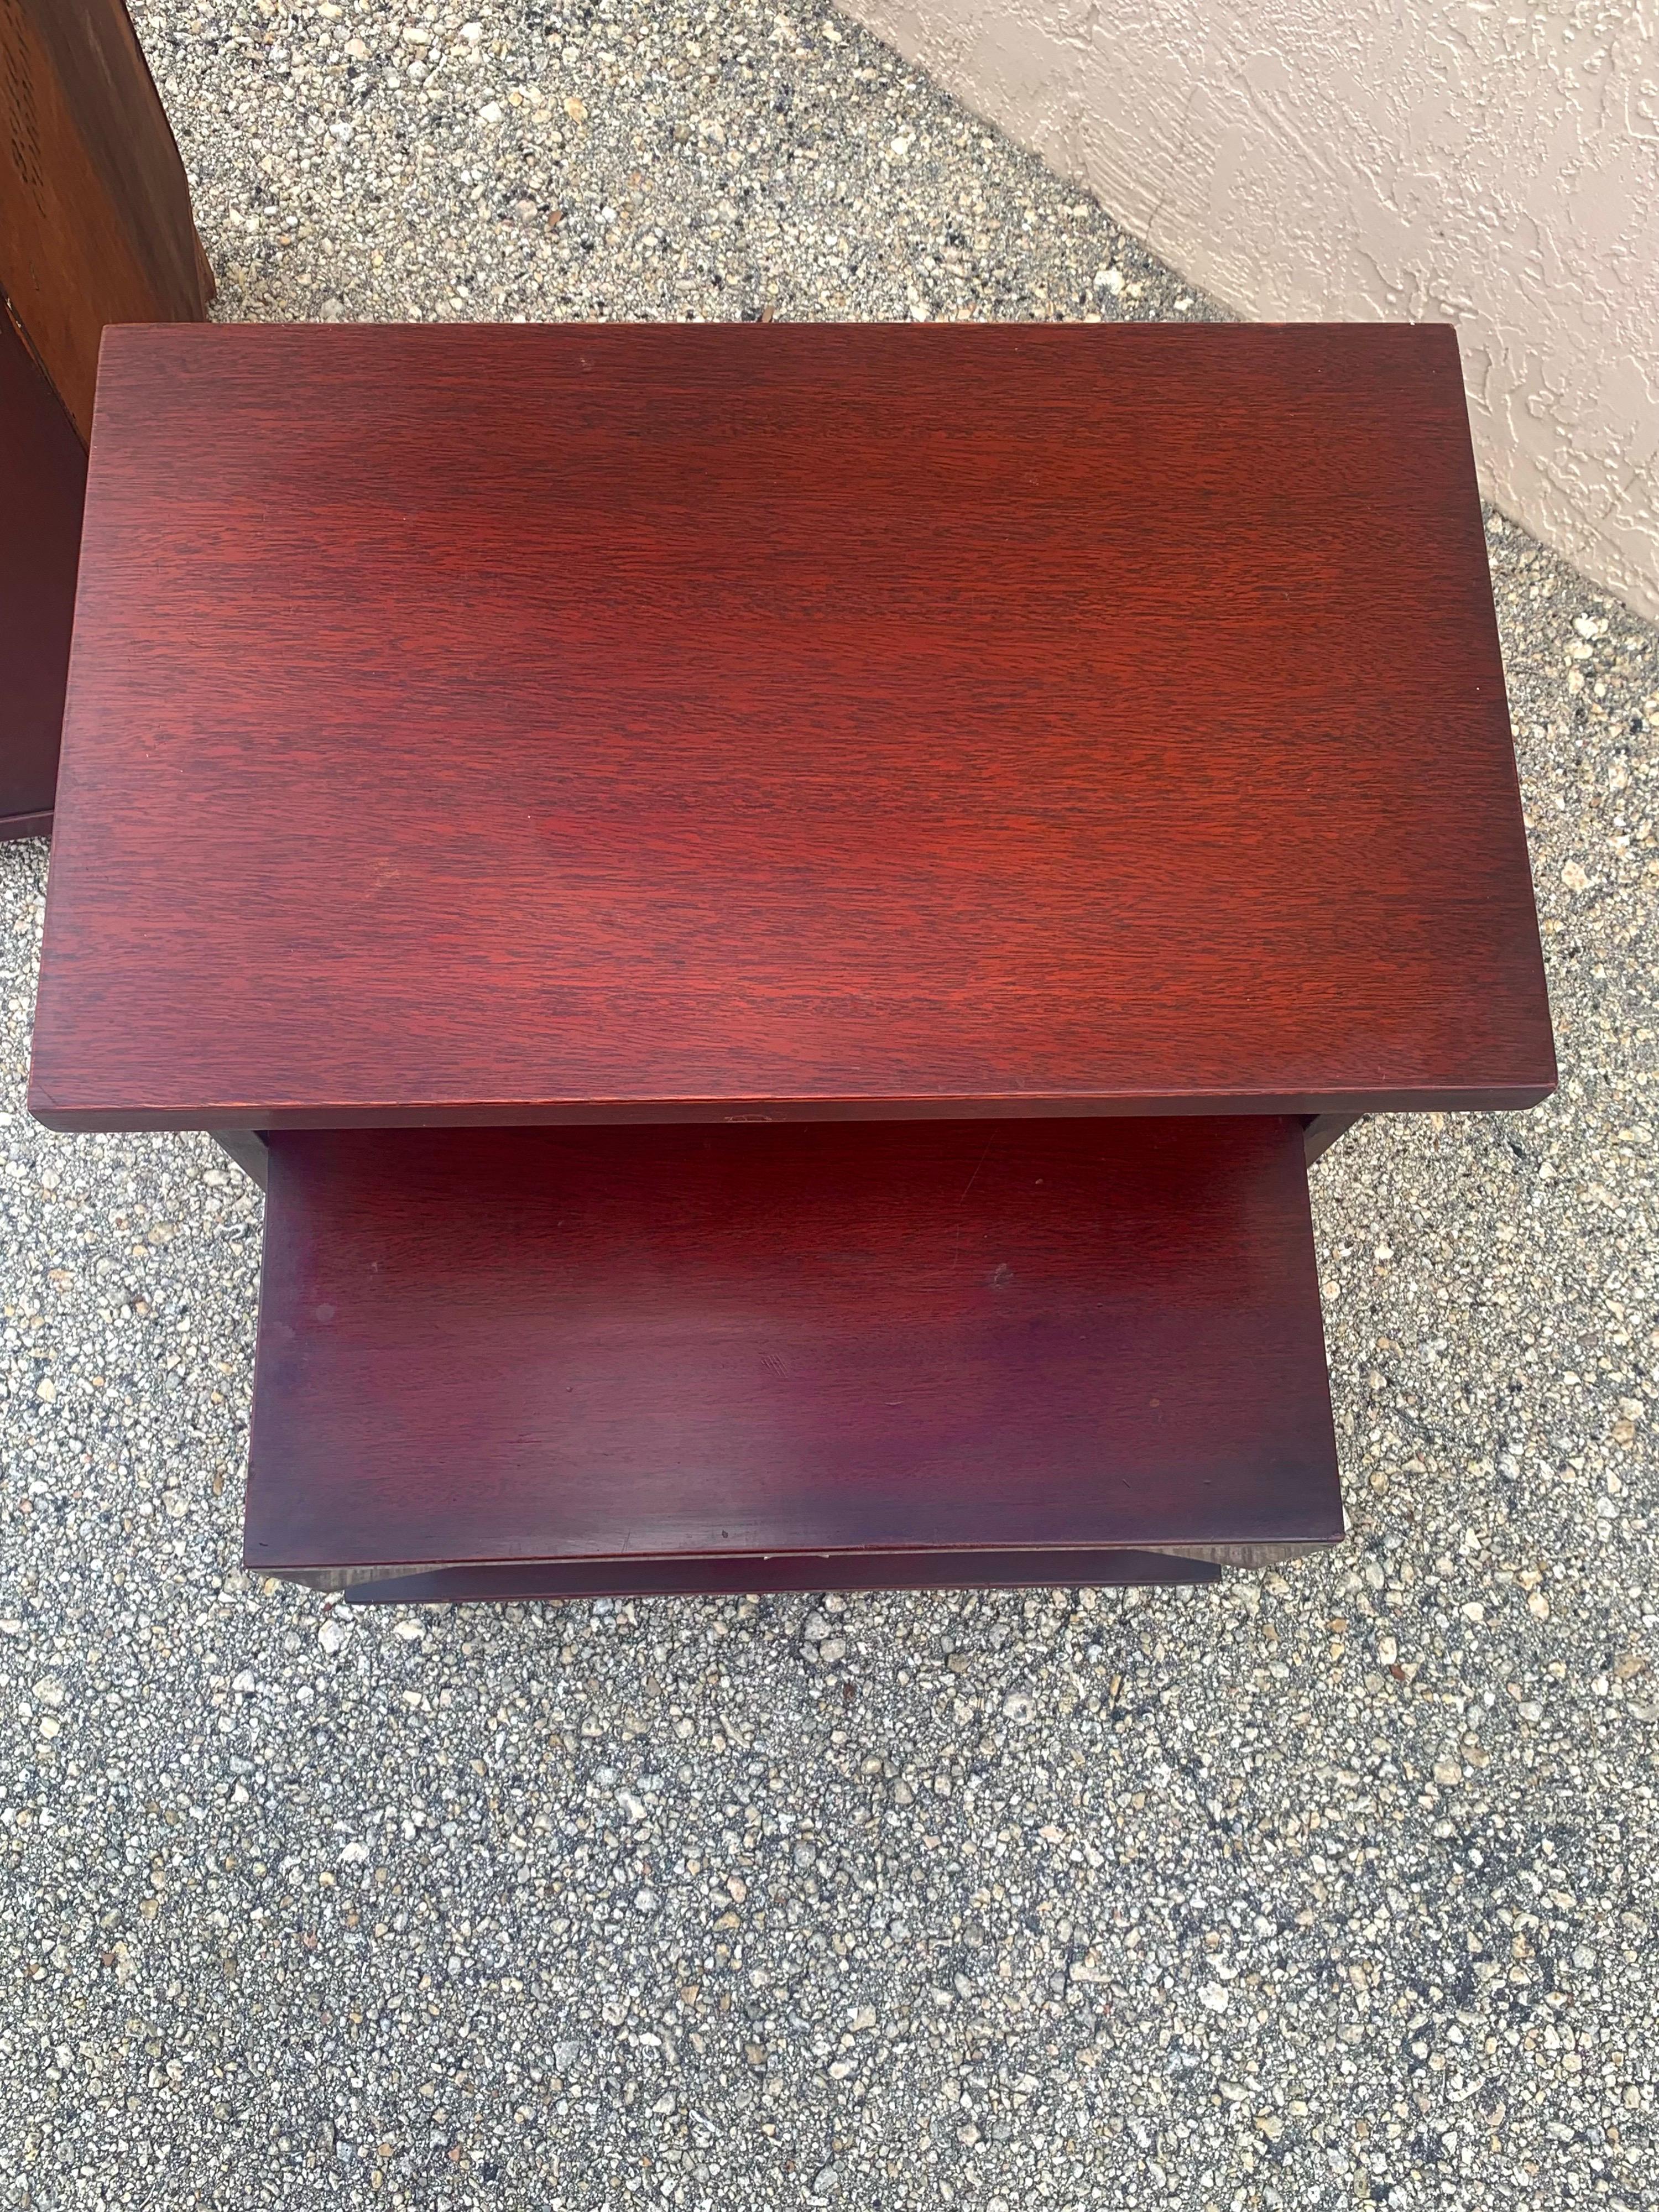 20th Century Mid-Century Modern Nightstands by Kent Coffey in Mahogany, a Pair